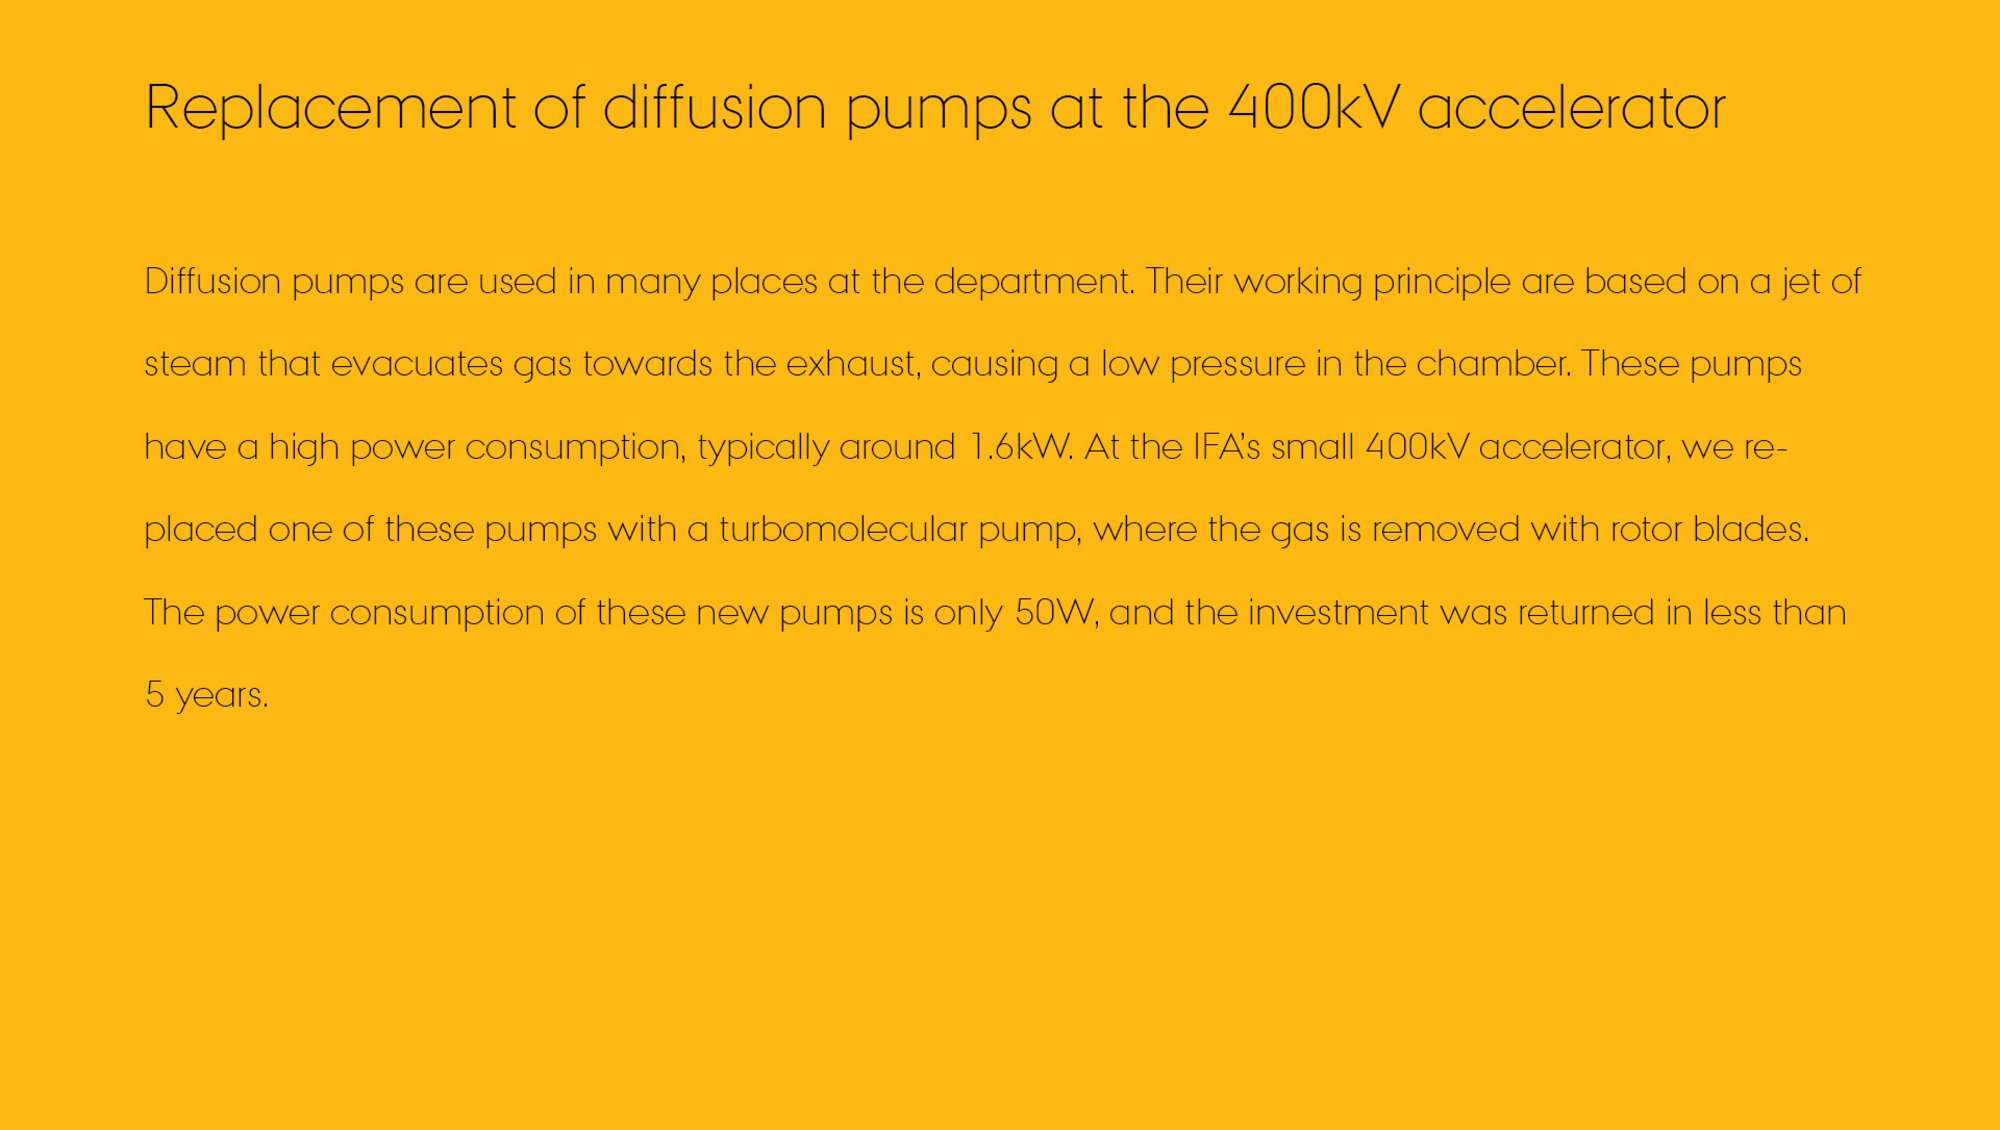 Text about the replacement of pumps